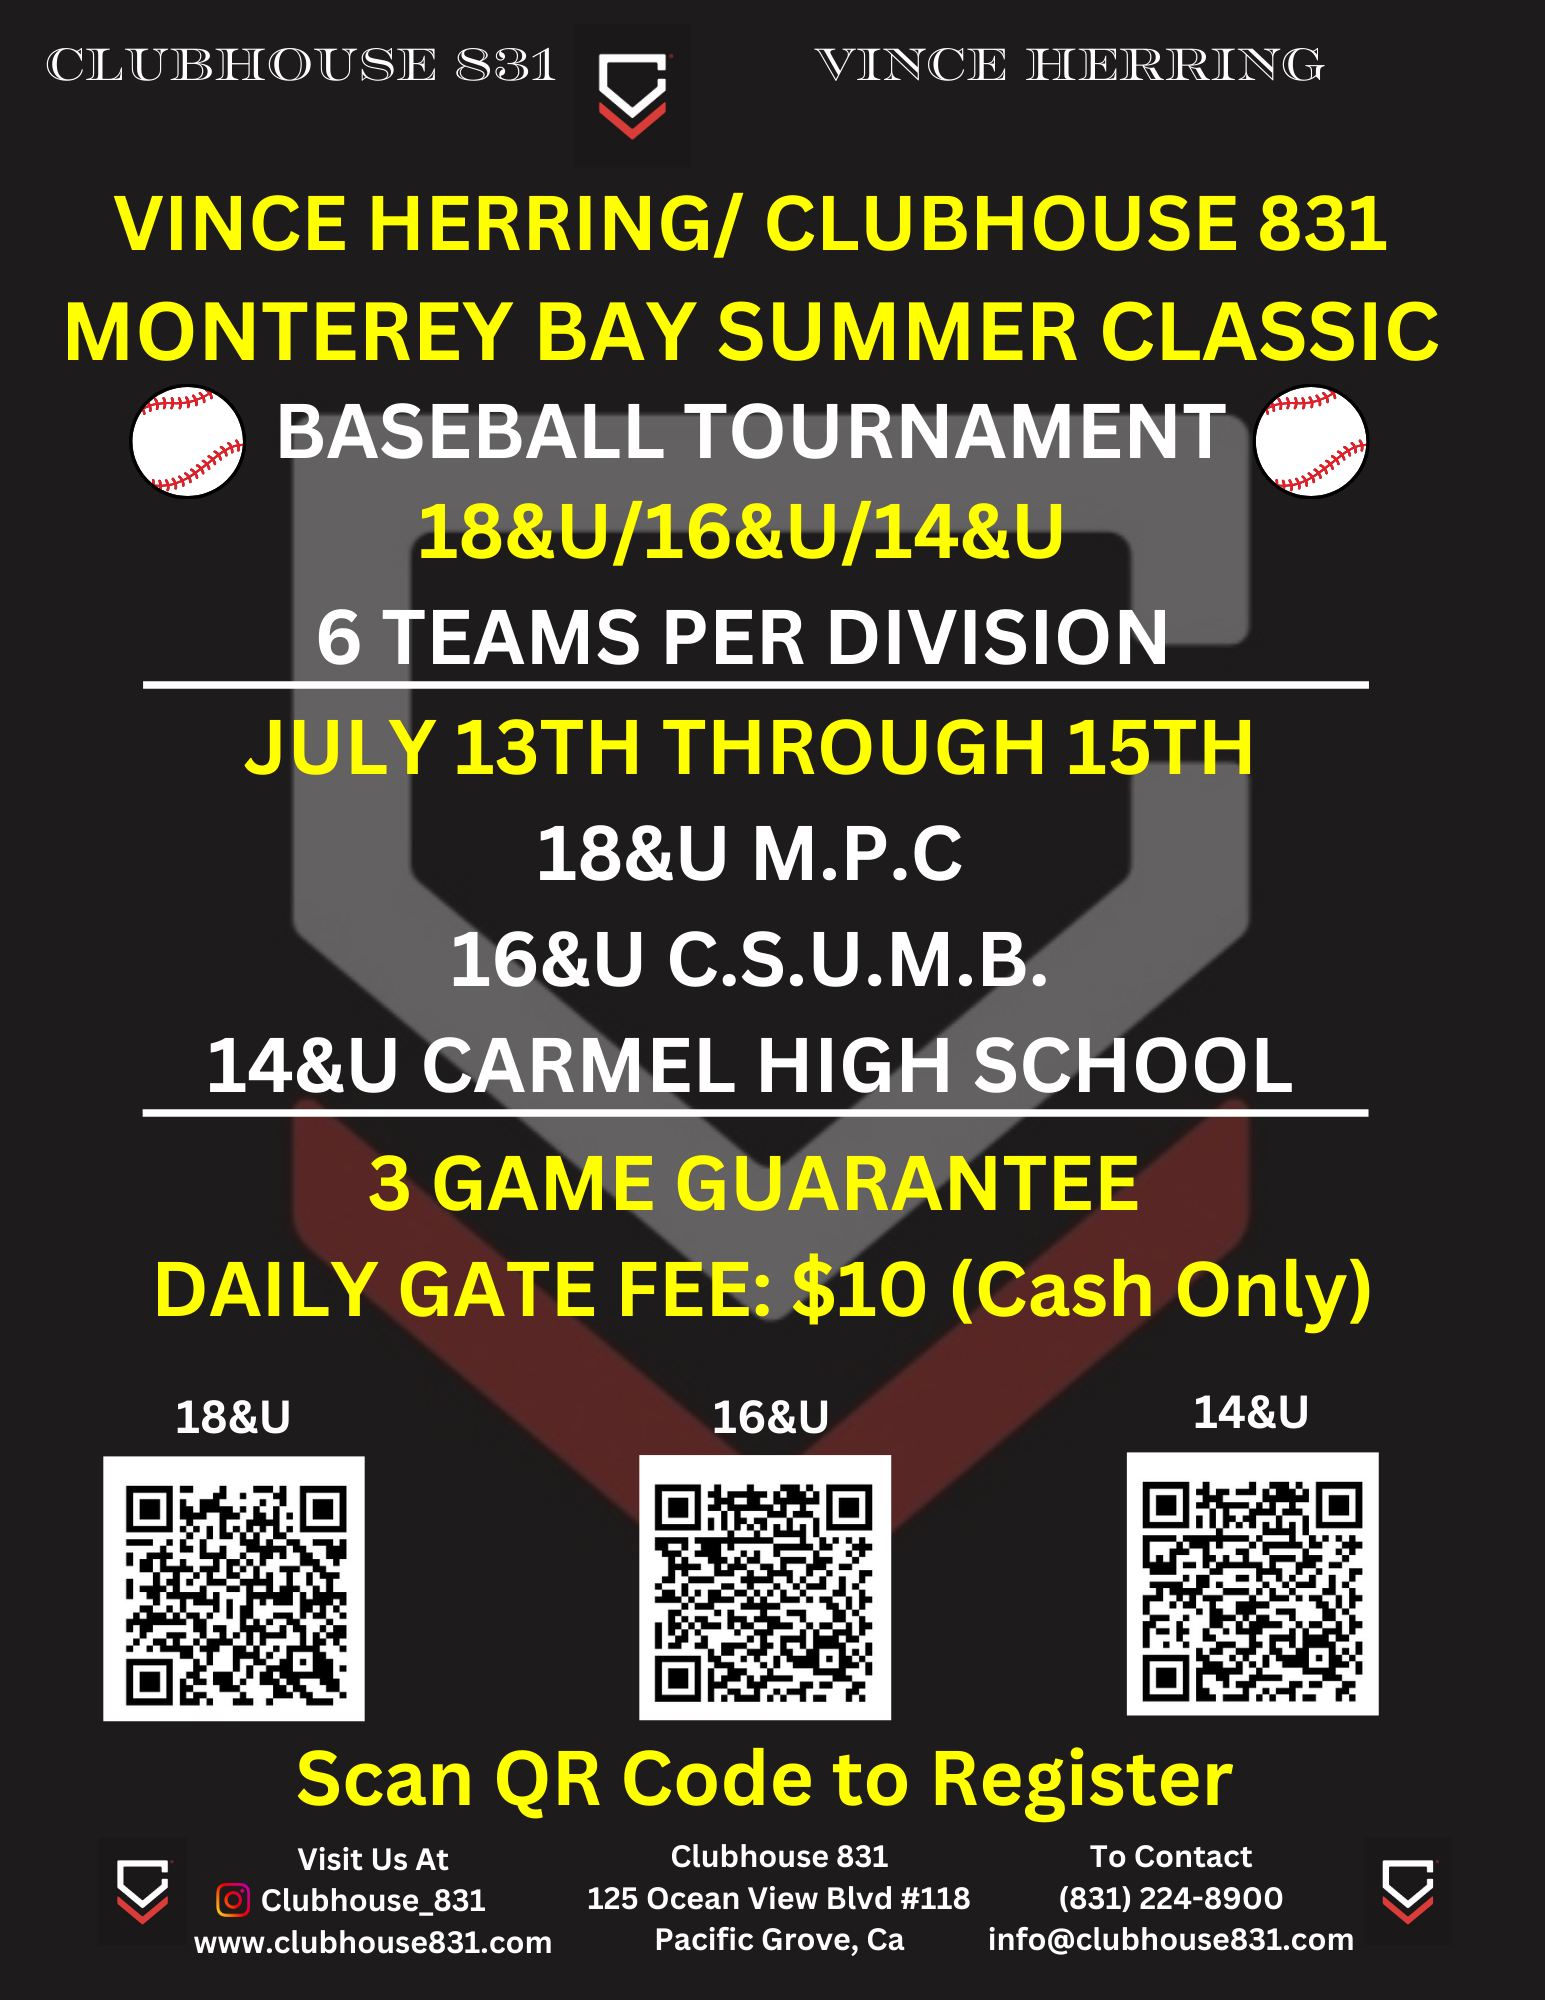 A poster for vince herring 's clubhouse 831 monterey bay summer classic baseball tournament